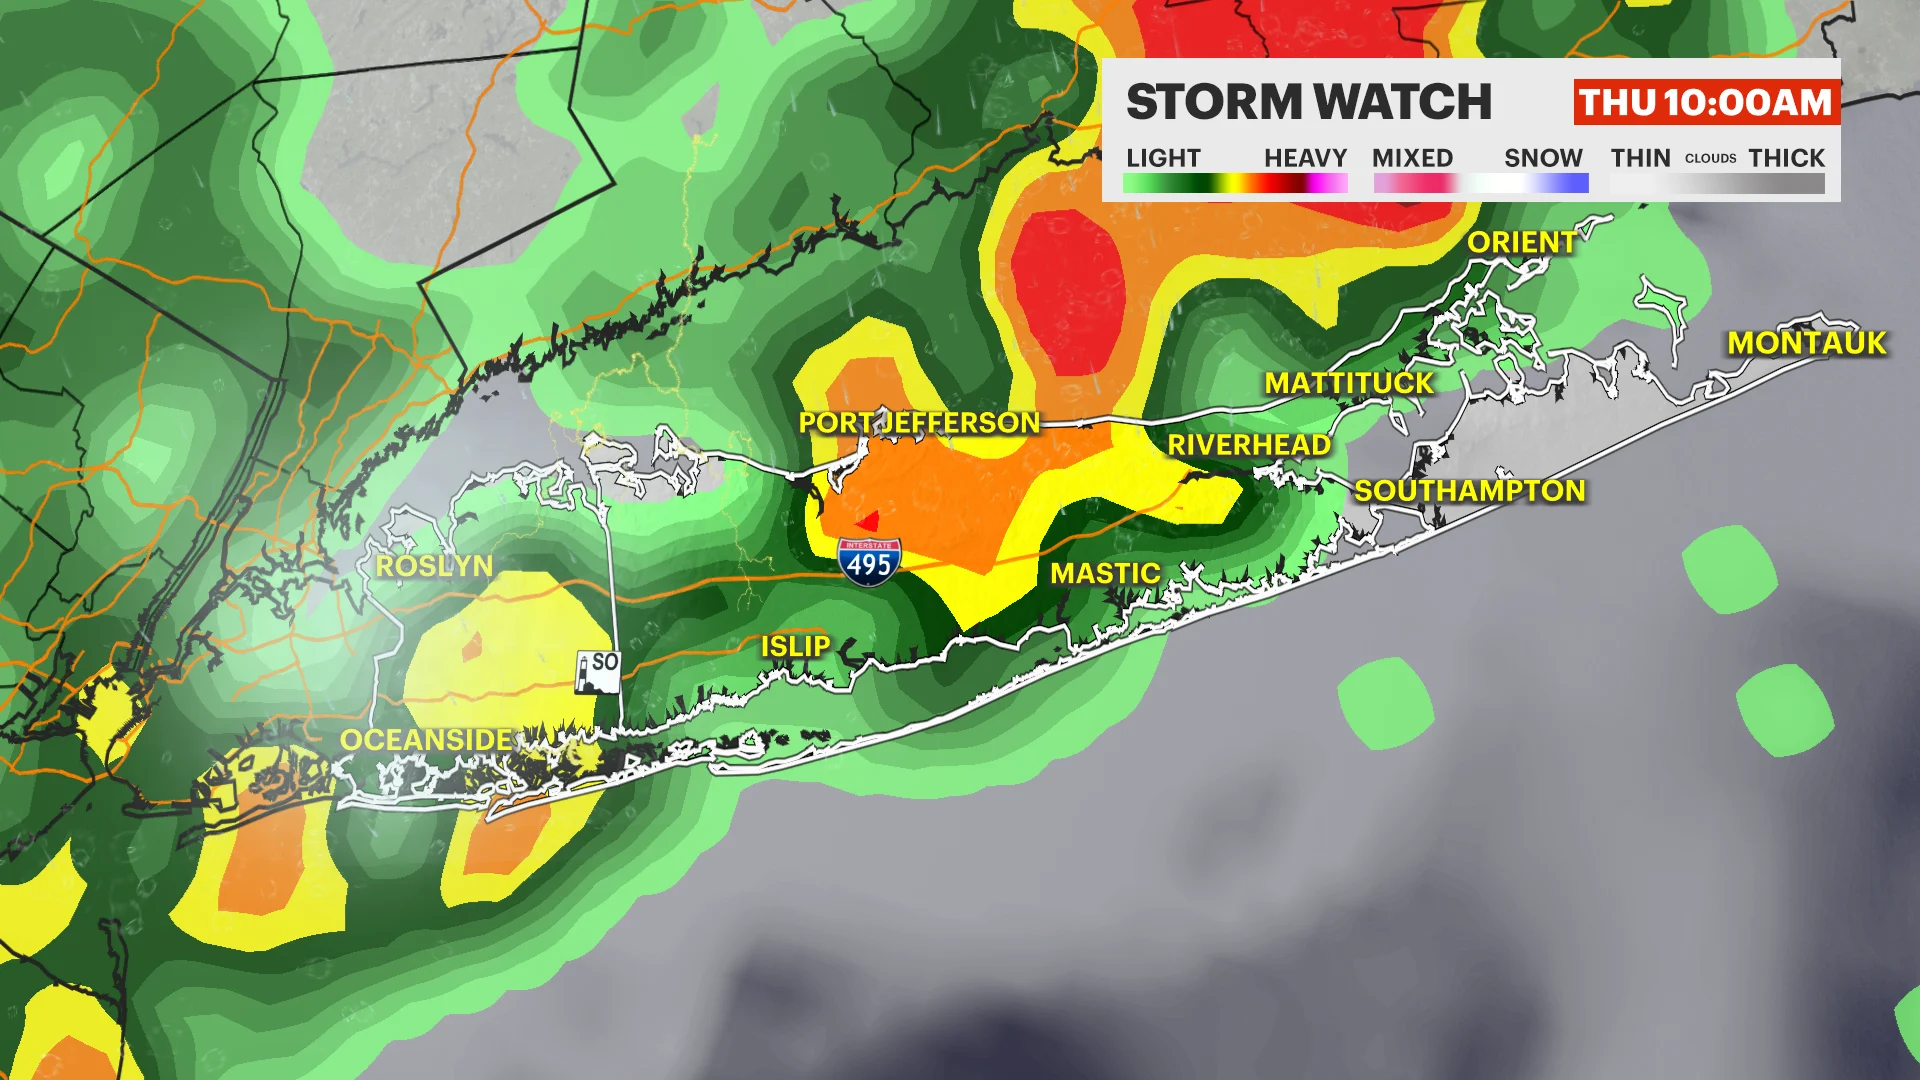 STORM WATCH: Showers, thunderstorms this morning with warm and humid conditions